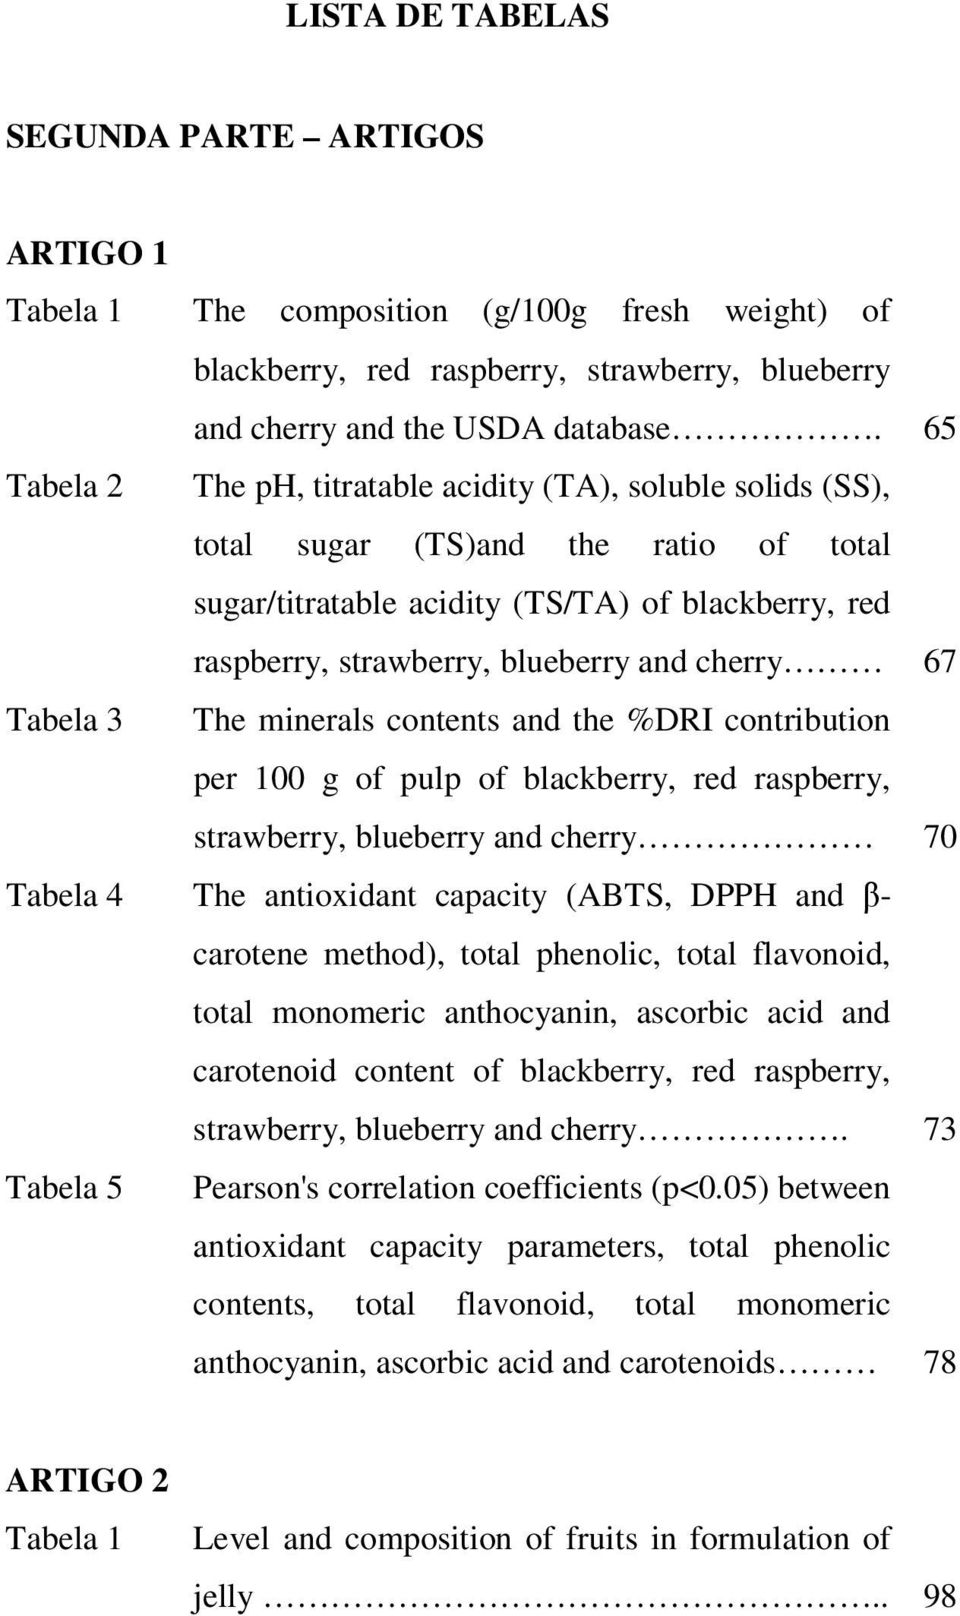 cherry 67 Tabela 3 The minerals contents and the %DRI contribution per 100 g of pulp of blackberry, red raspberry, strawberry, blueberry and cherry 70 Tabela 4 The antioxidant capacity (ABTS, DPPH